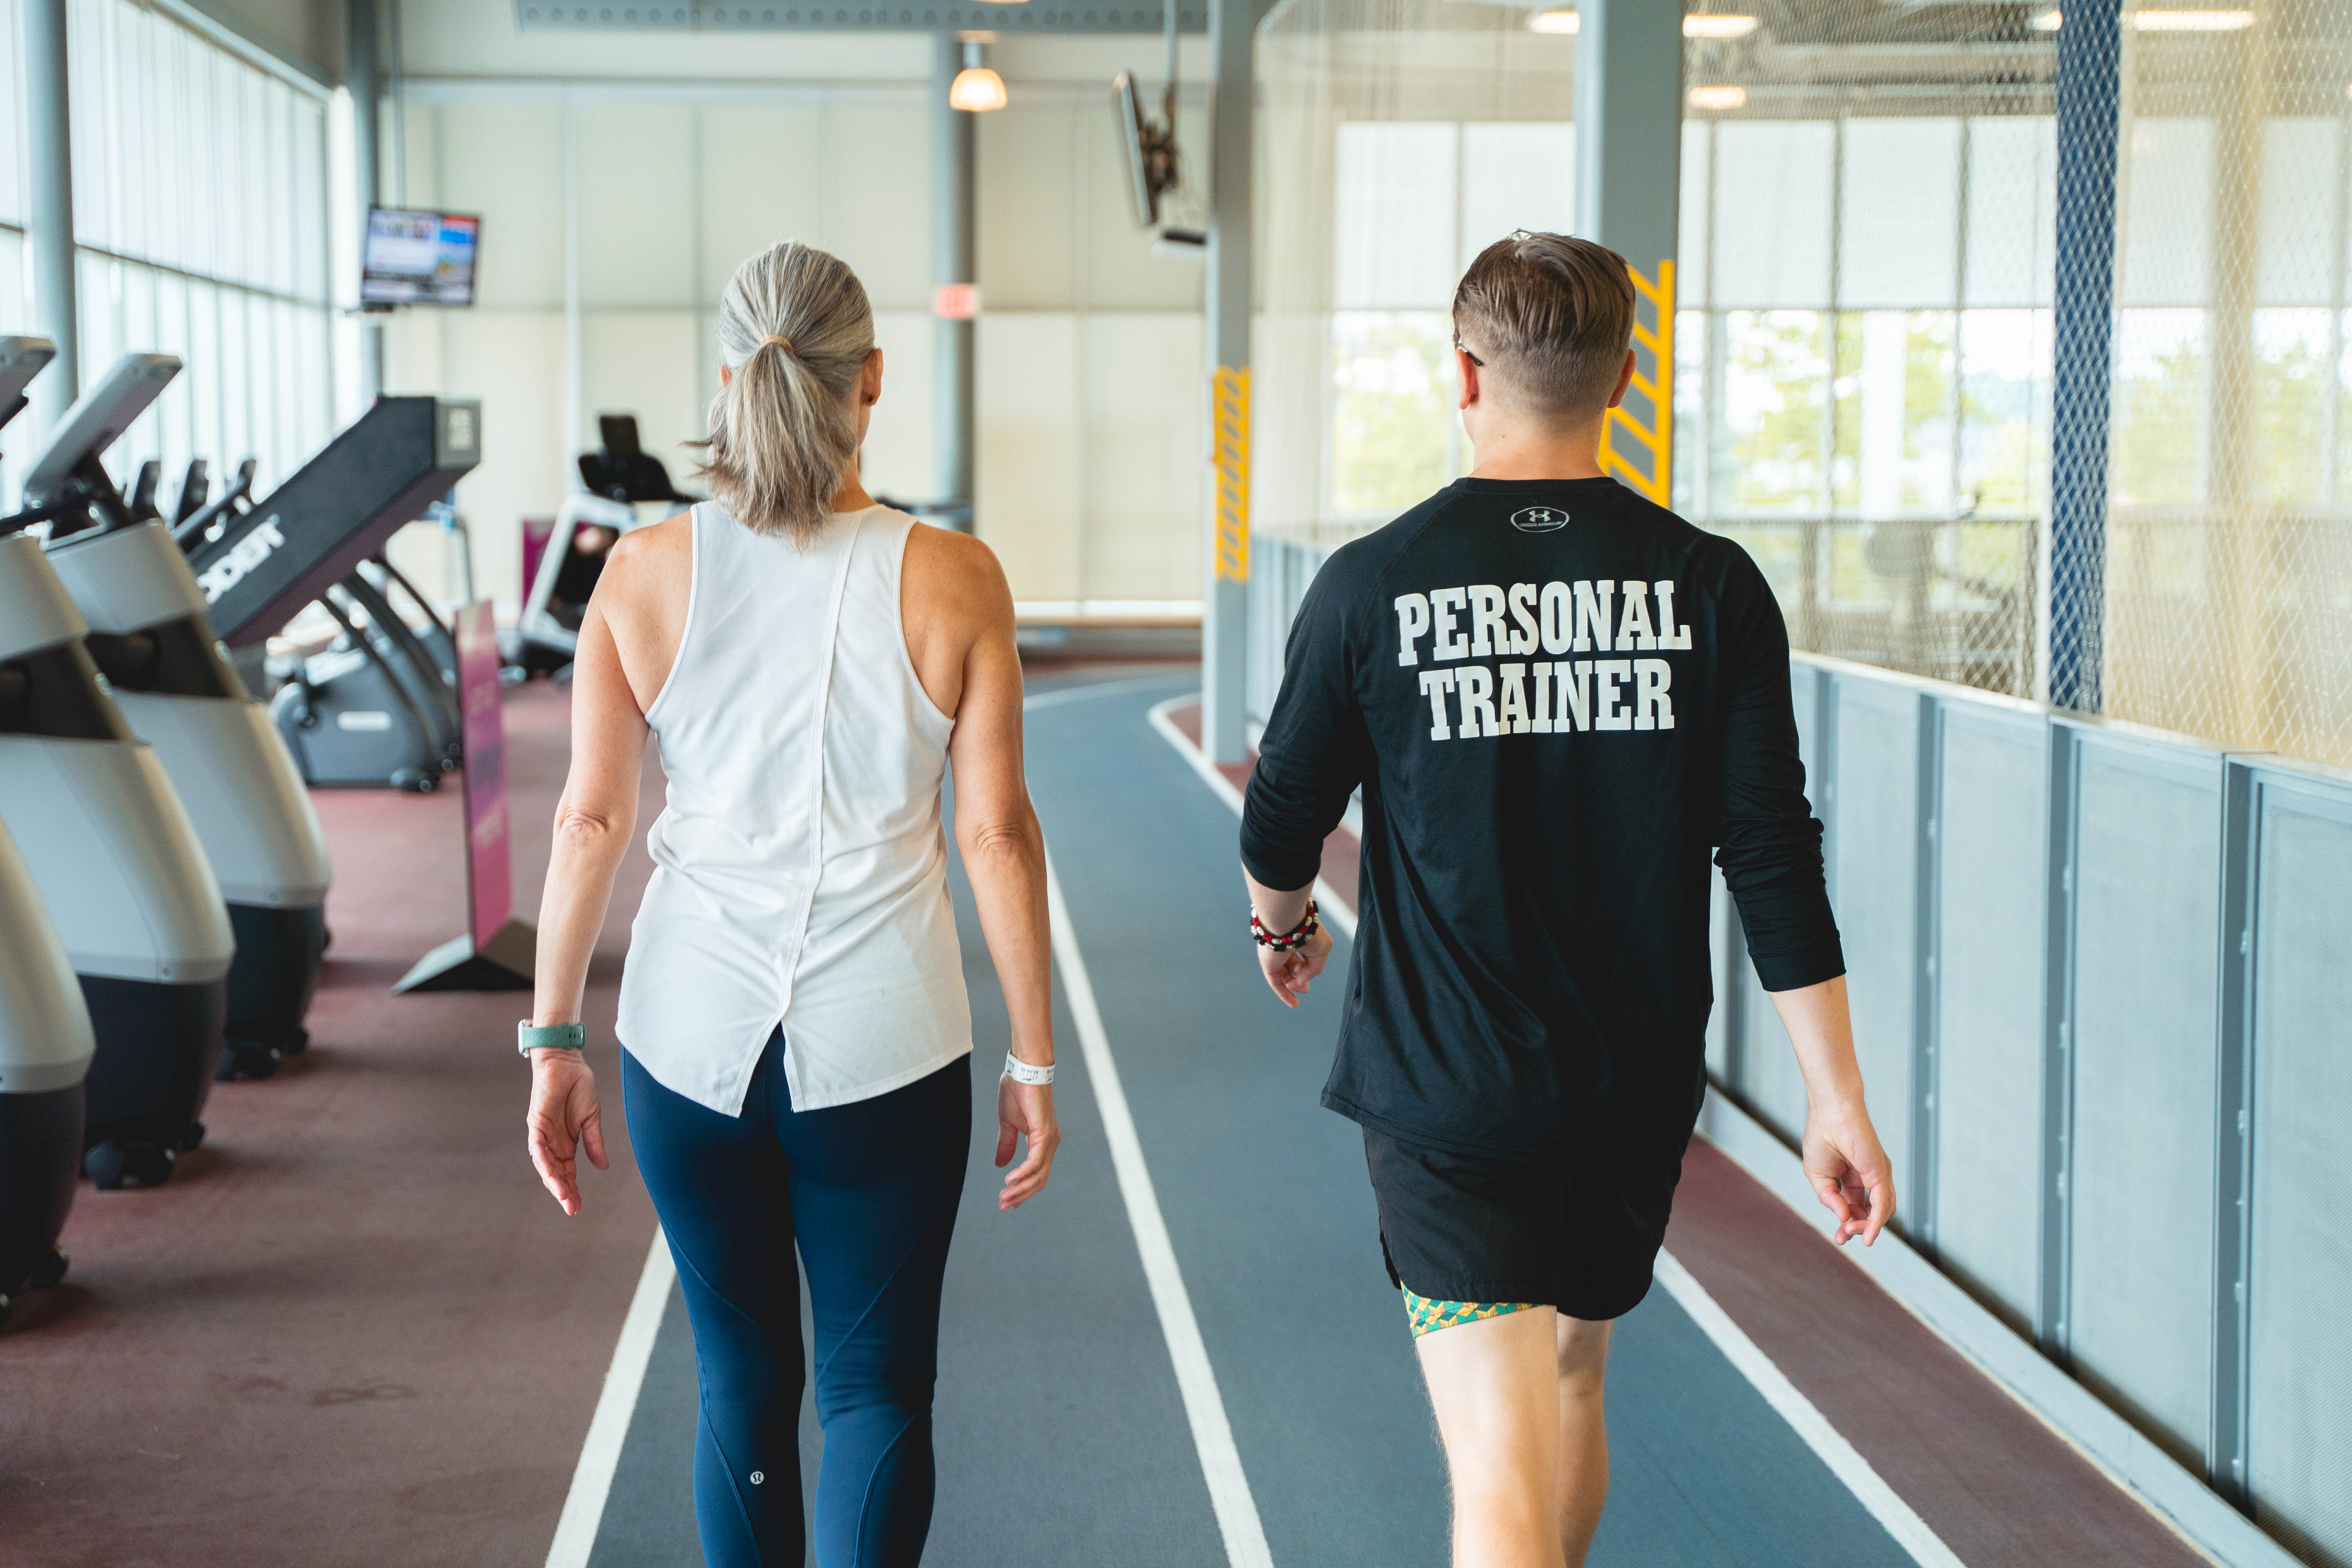 personal trainer and client walking on track